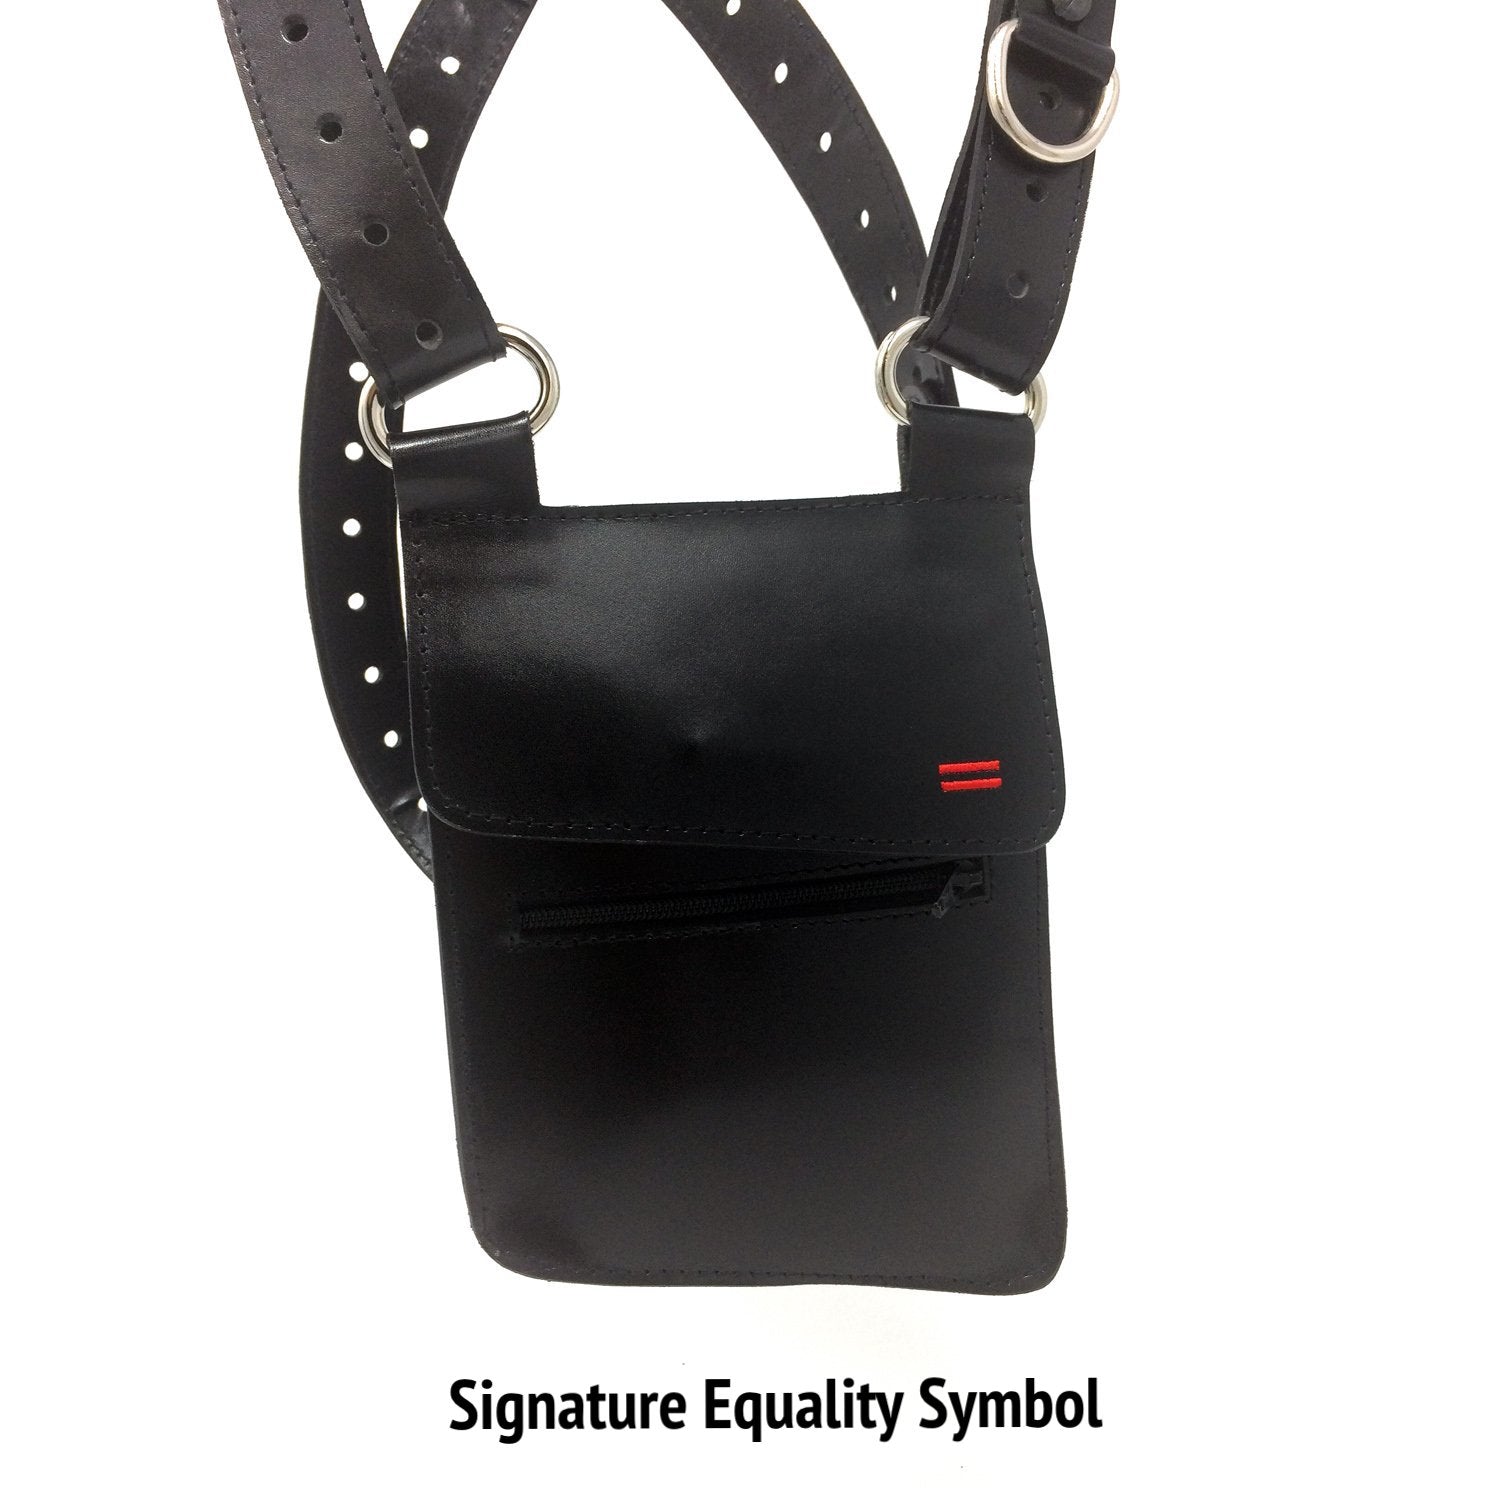 (NEW) Genderfree Modular + Adjustable Utility Holster Harness with Bag v2  (Single or Dual)